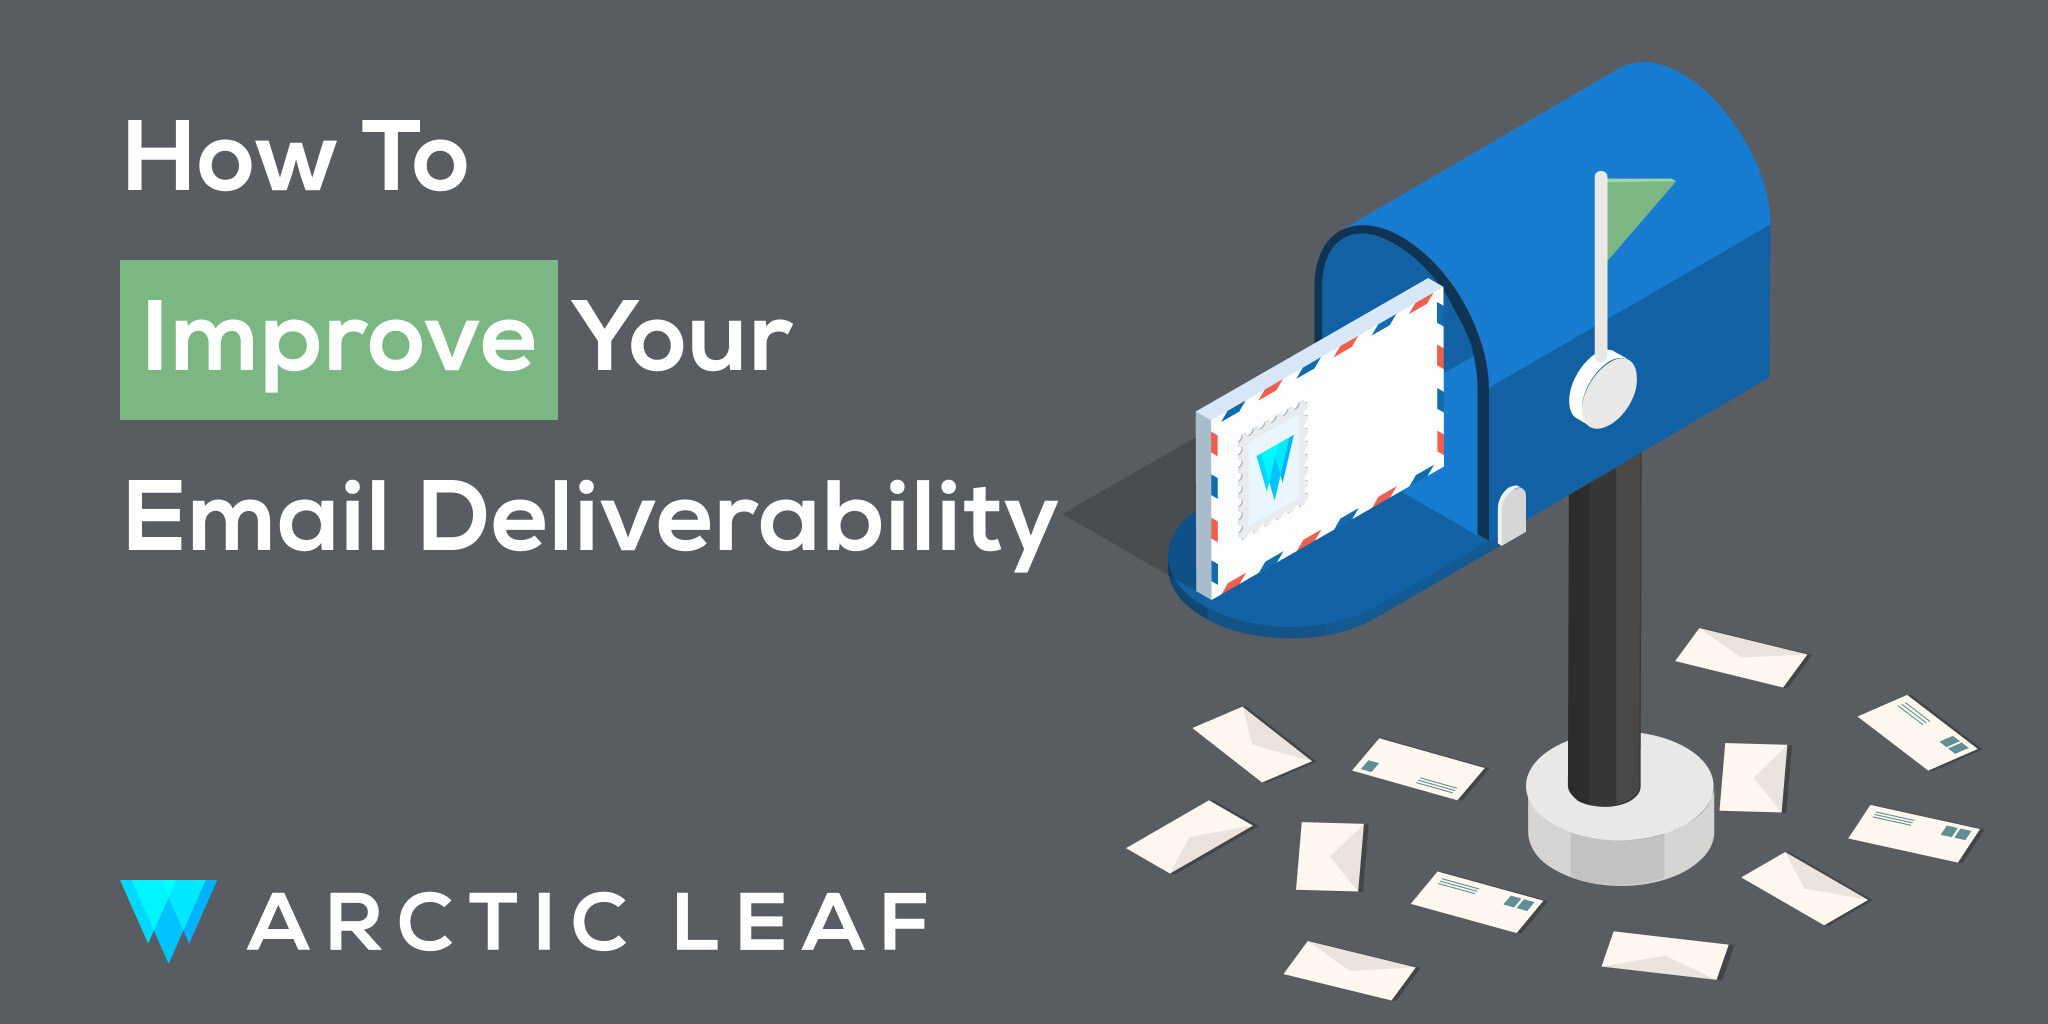 How to Improve Your Email Deliverability title beside a mailbox with a large envelope inside above a number of smaller, scattered envelopes below